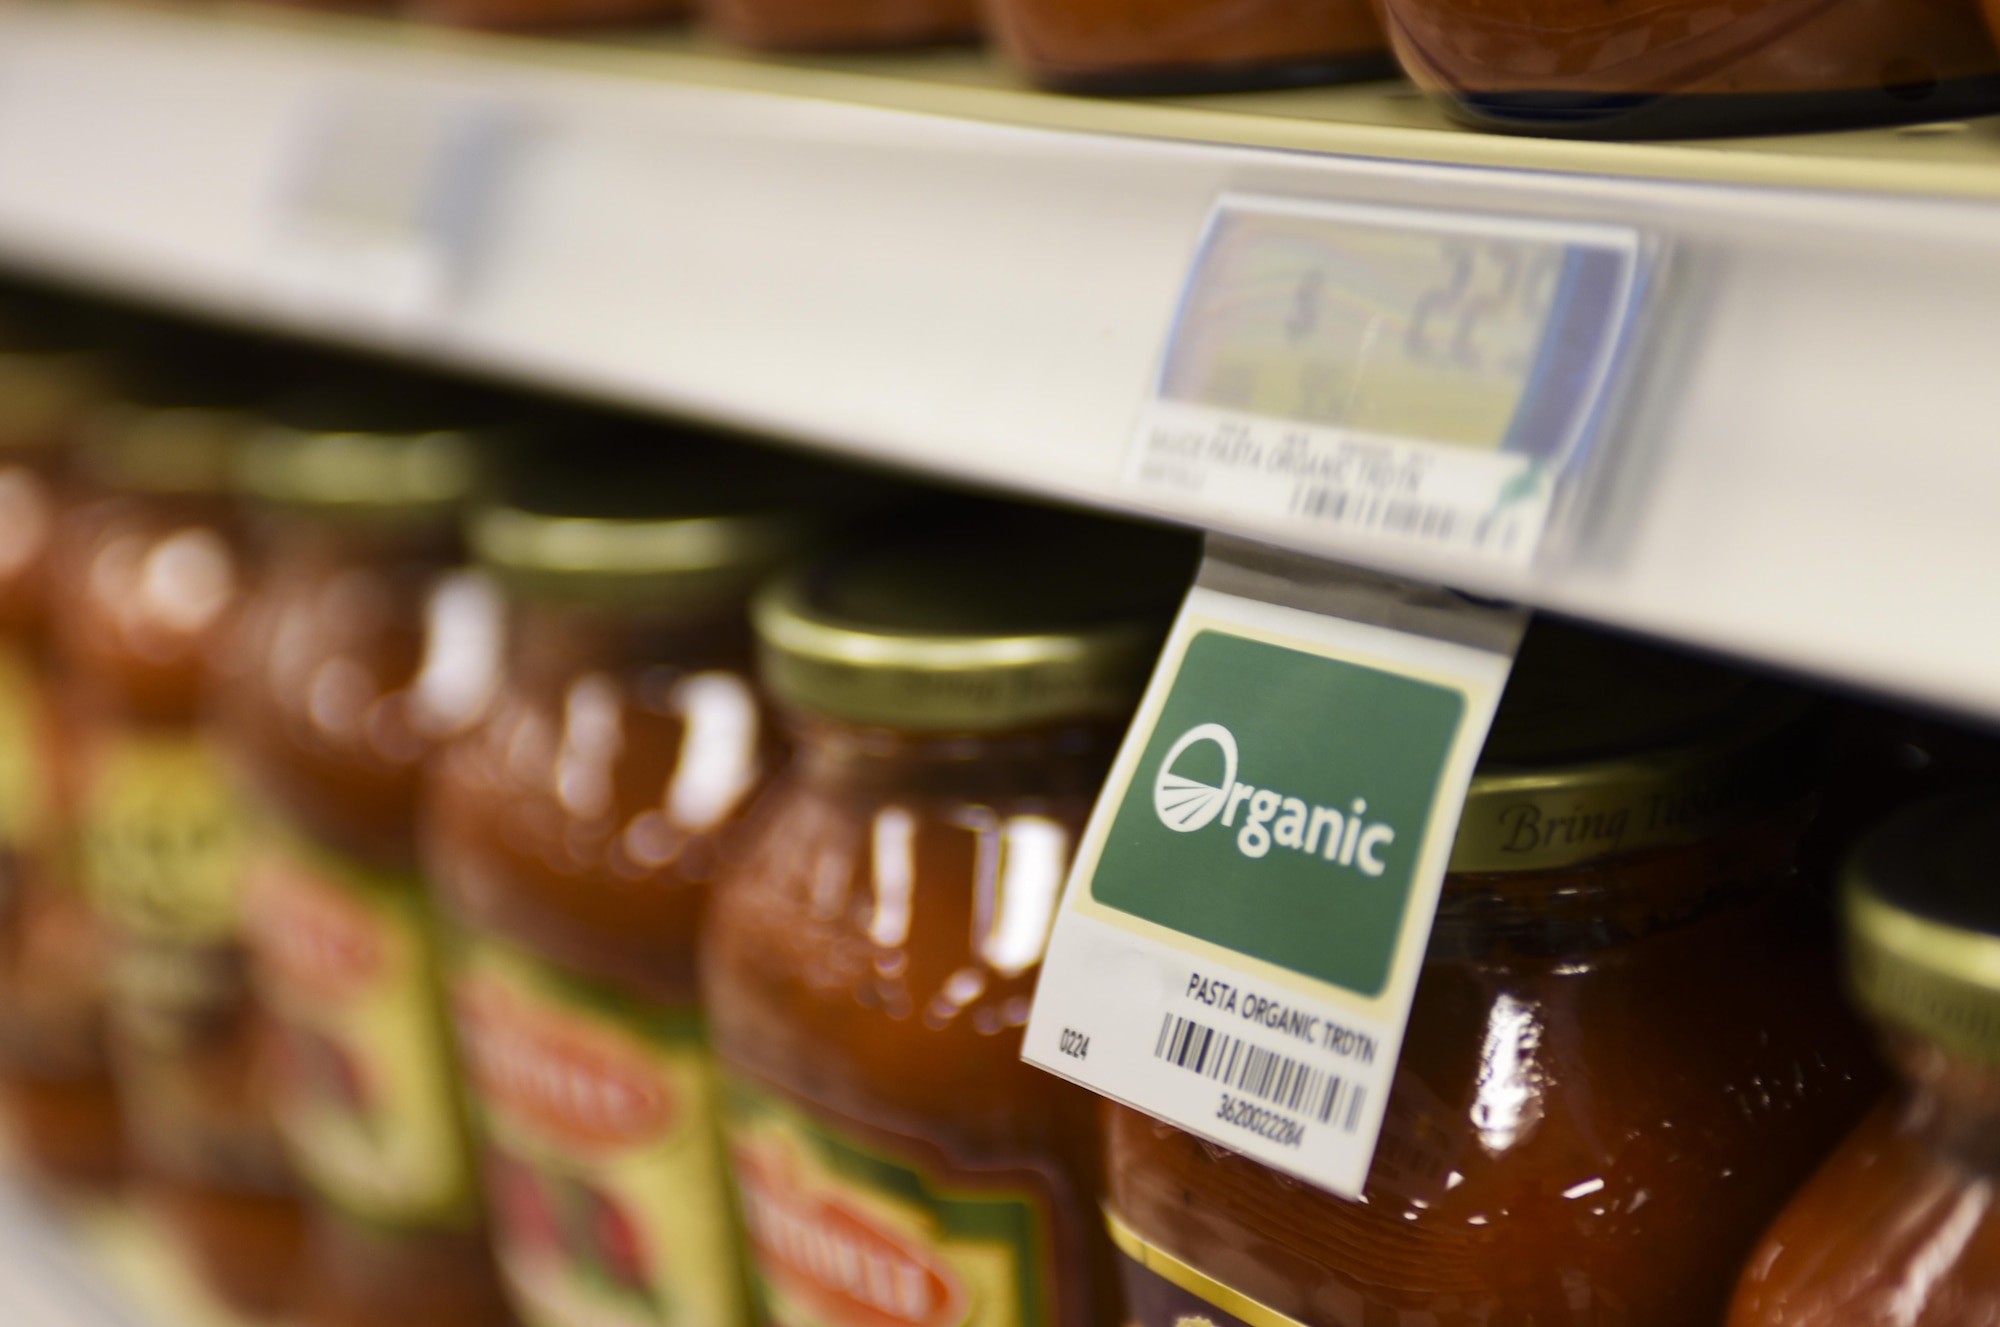 A row of products are marked with an “organic” label inside the commissary at Ellsworth Air Force Base, S.D., on Jan. 11, 2016. The Defense Commissary Agency implemented a new Nutrition Guide Program by labeling certain foods that are low sodium, no-added sugar, high fiber, whole grain and organic with color-coded shelf tags. Dietitian approved, these labels are designed to help customers locate healthy options faster – saving time and hassle. (U.S. Air Force illustration by Airman 1st Class Randahl J. Jenson)